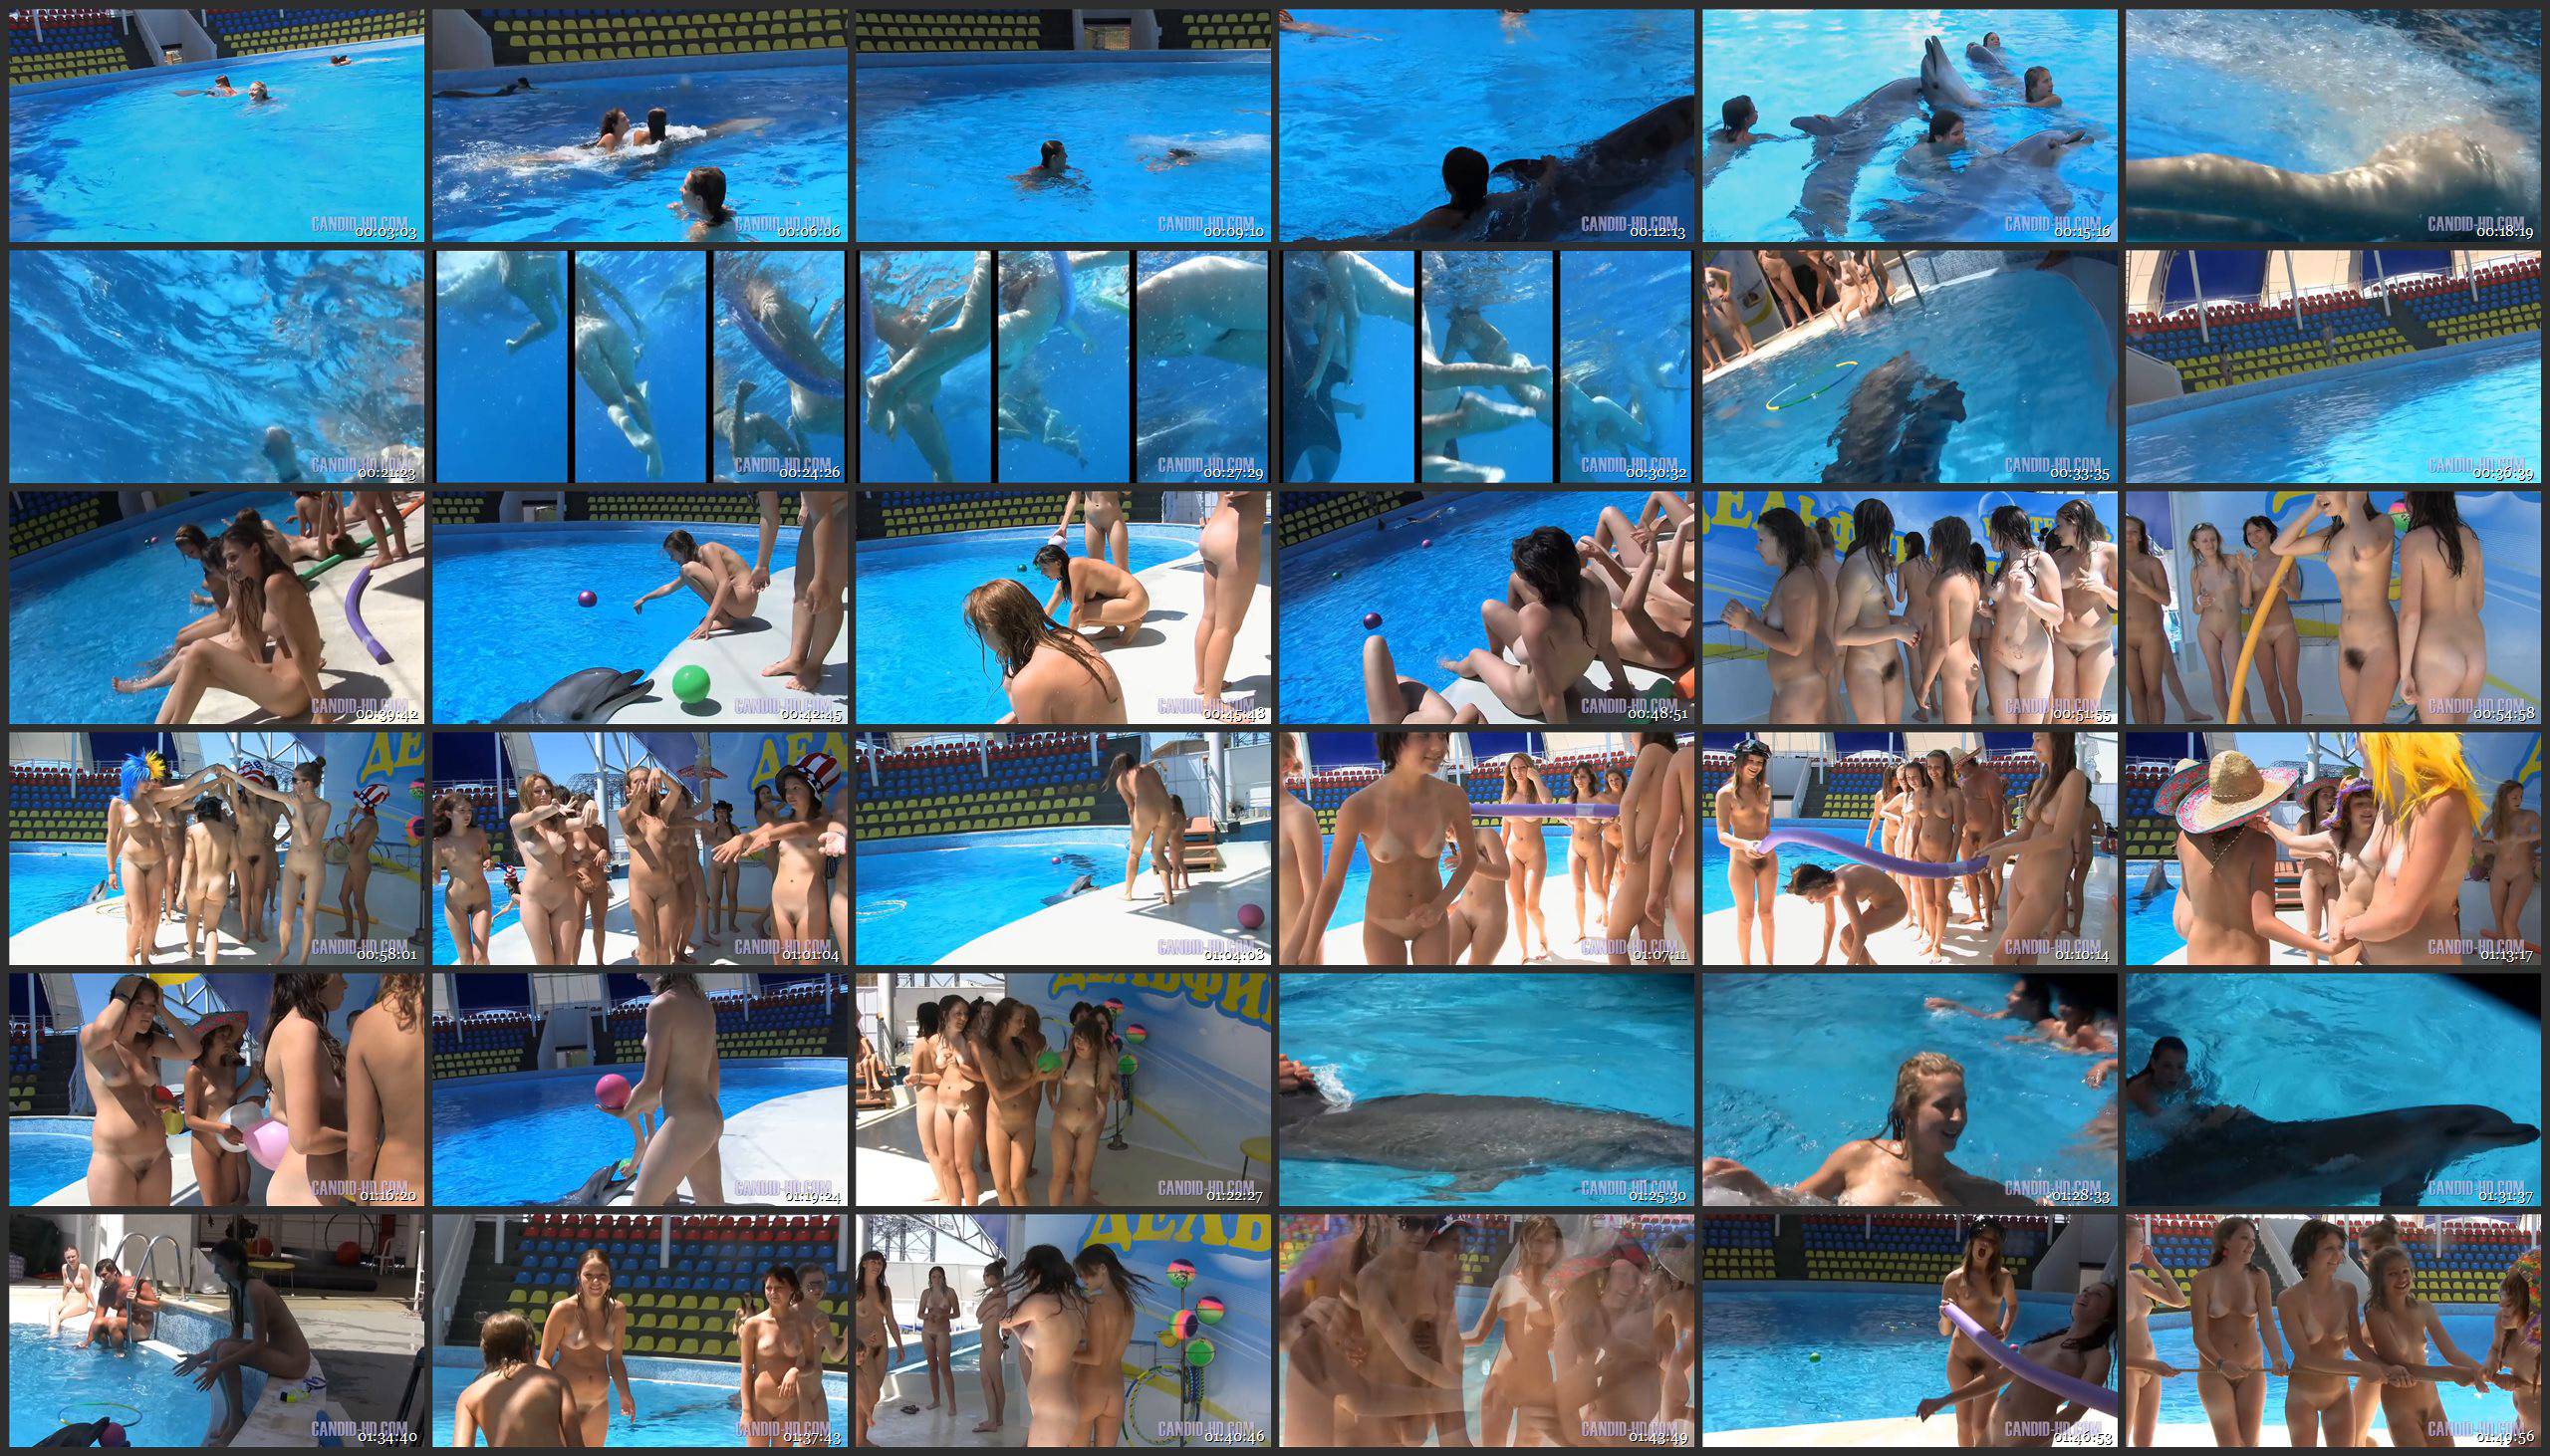 Candid-HD Videos-Amazing Dolphin Encounter - Thumbnails